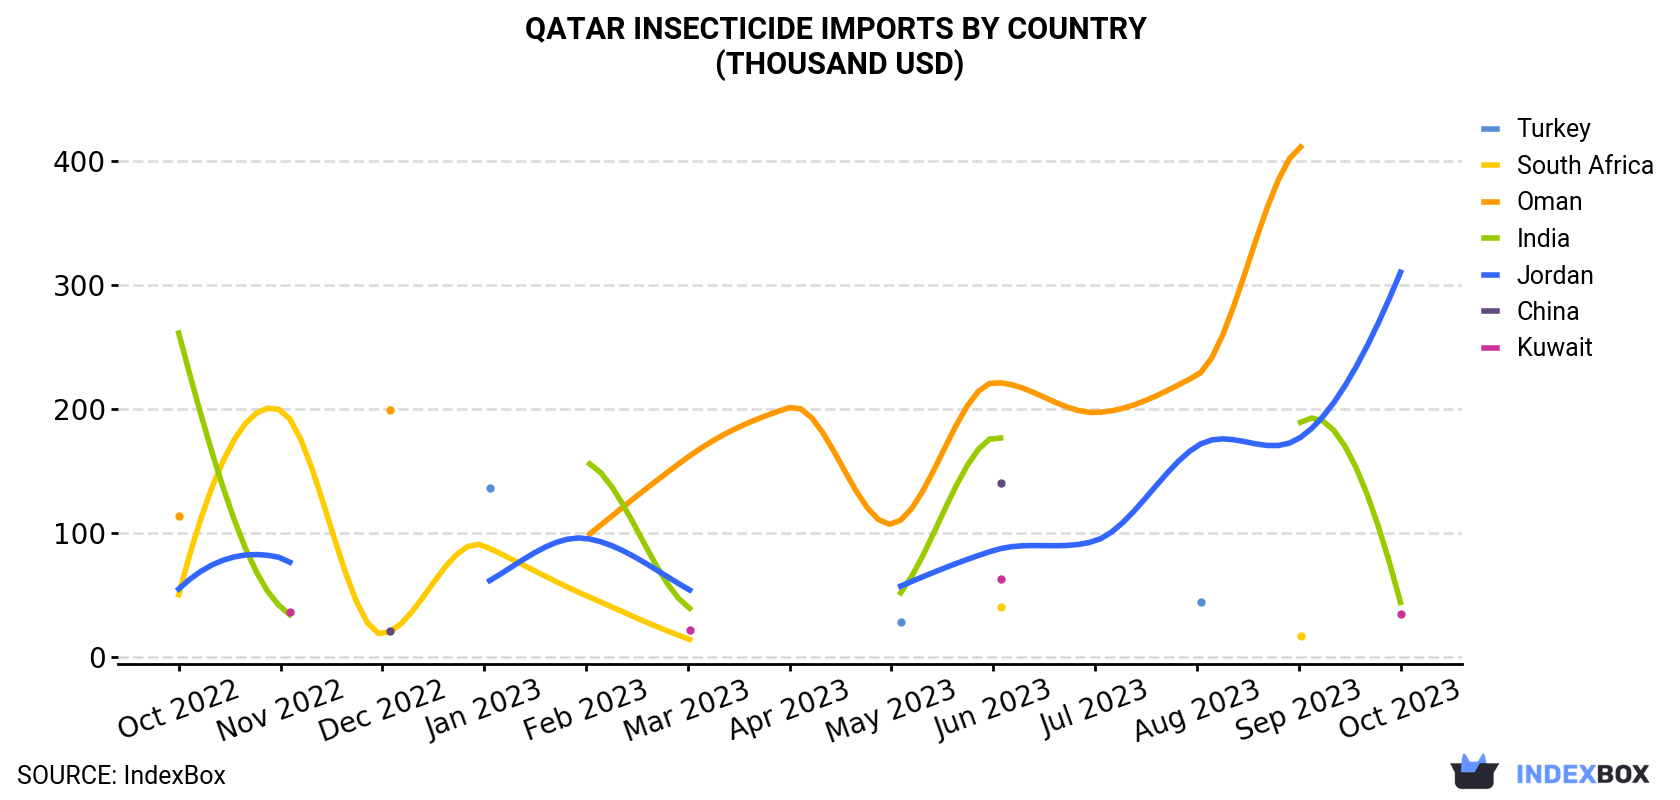 Qatar Insecticide Imports By Country (Thousand USD)